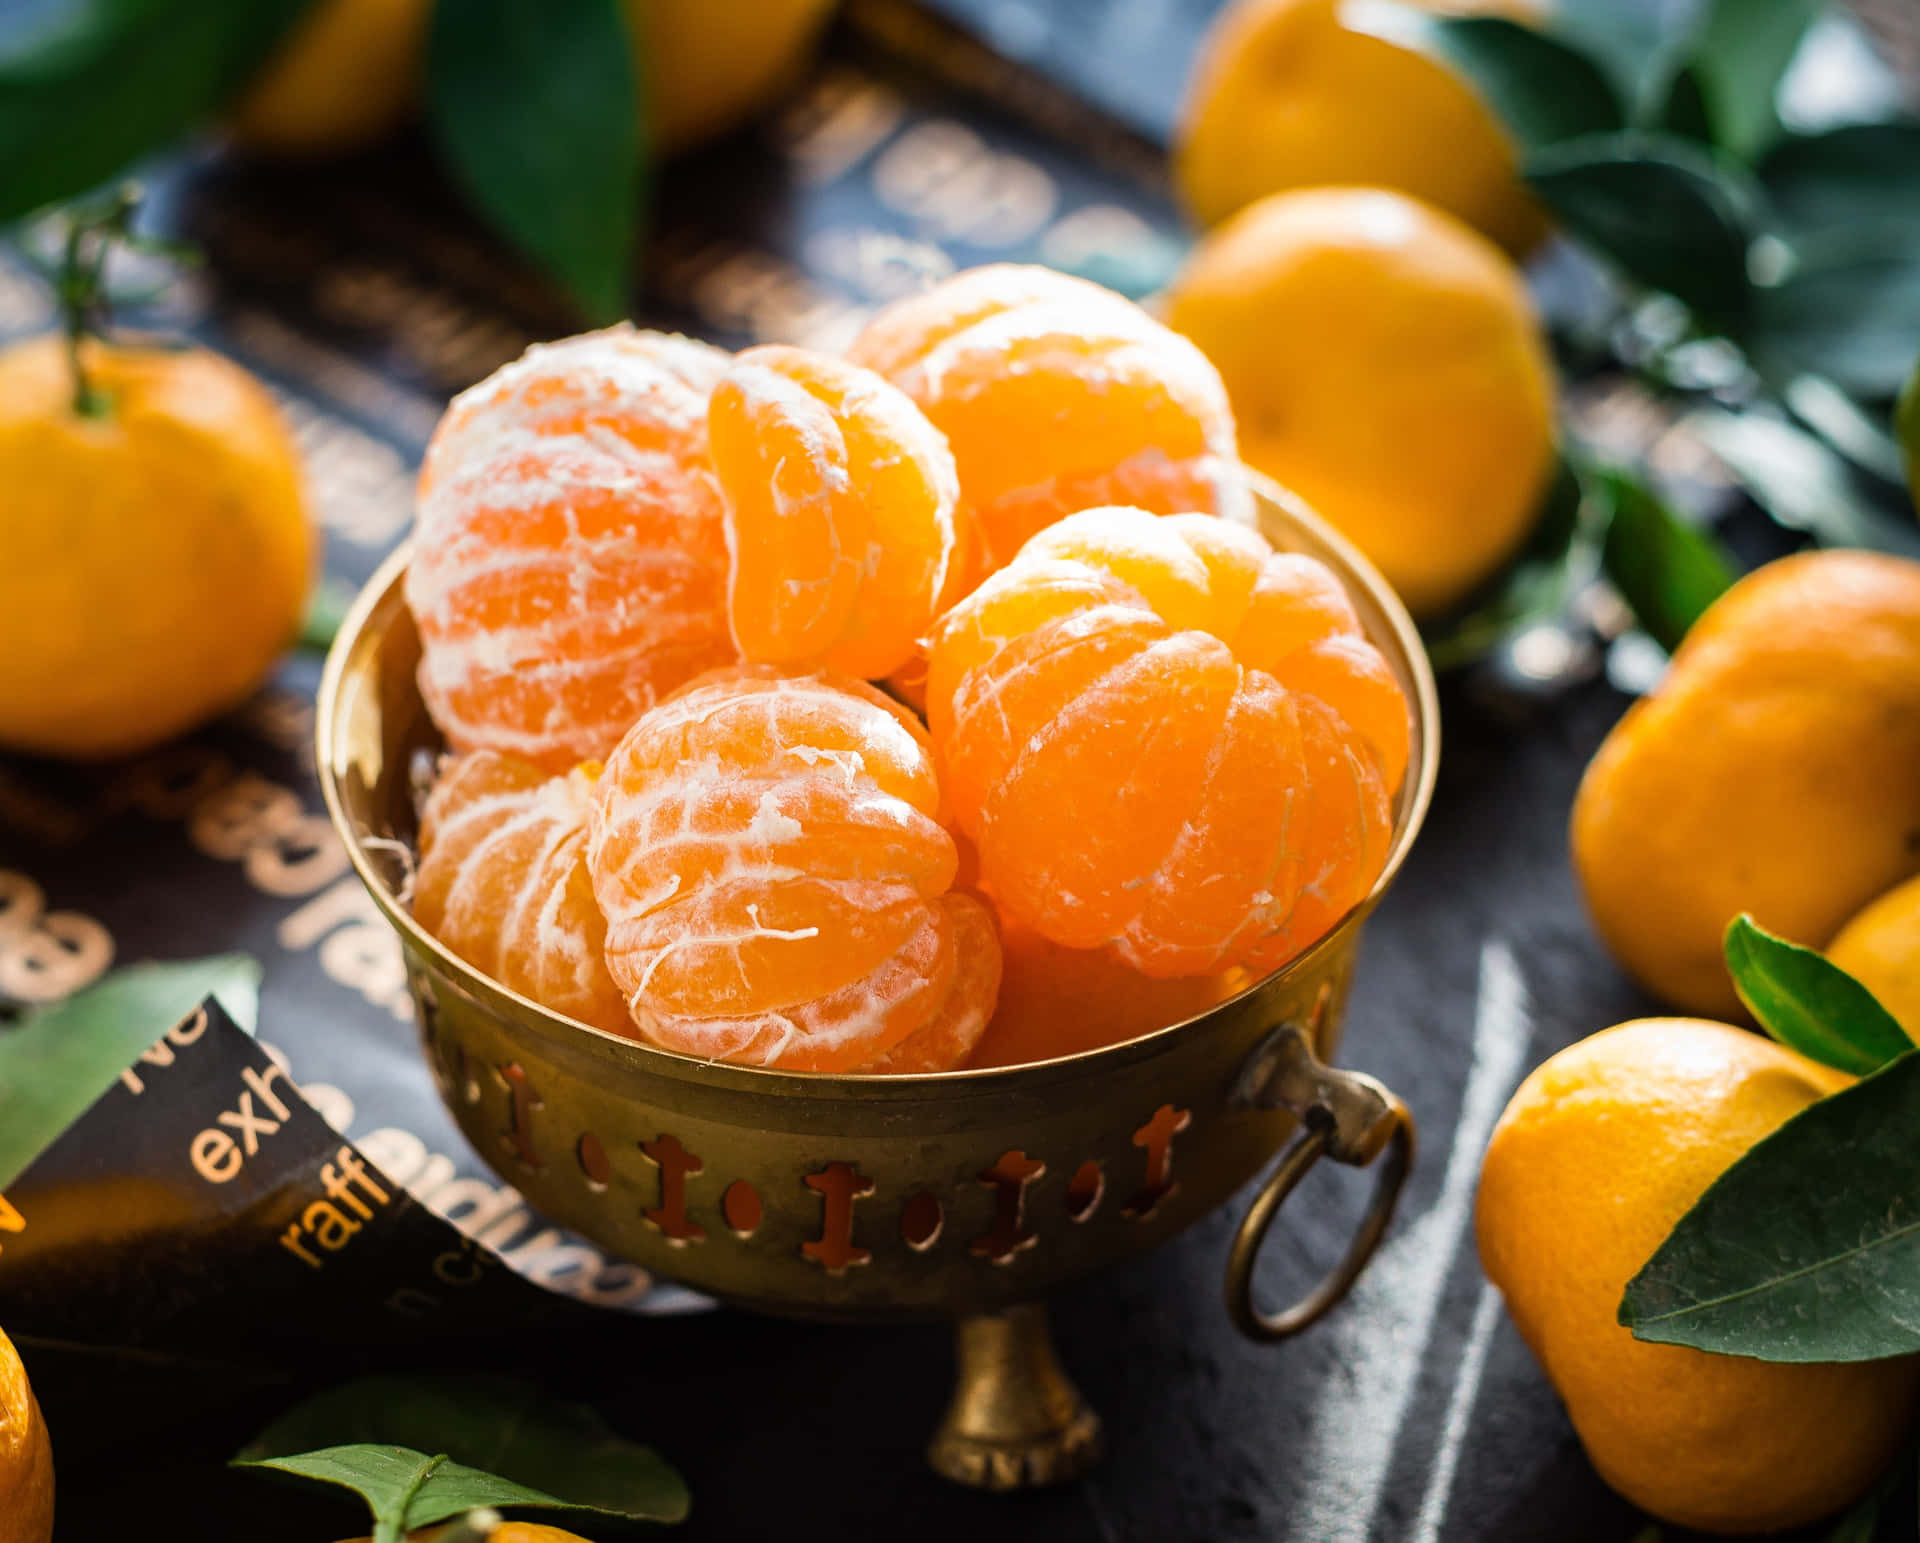 Bright and vibrant, oranges are a great addition to any meal.